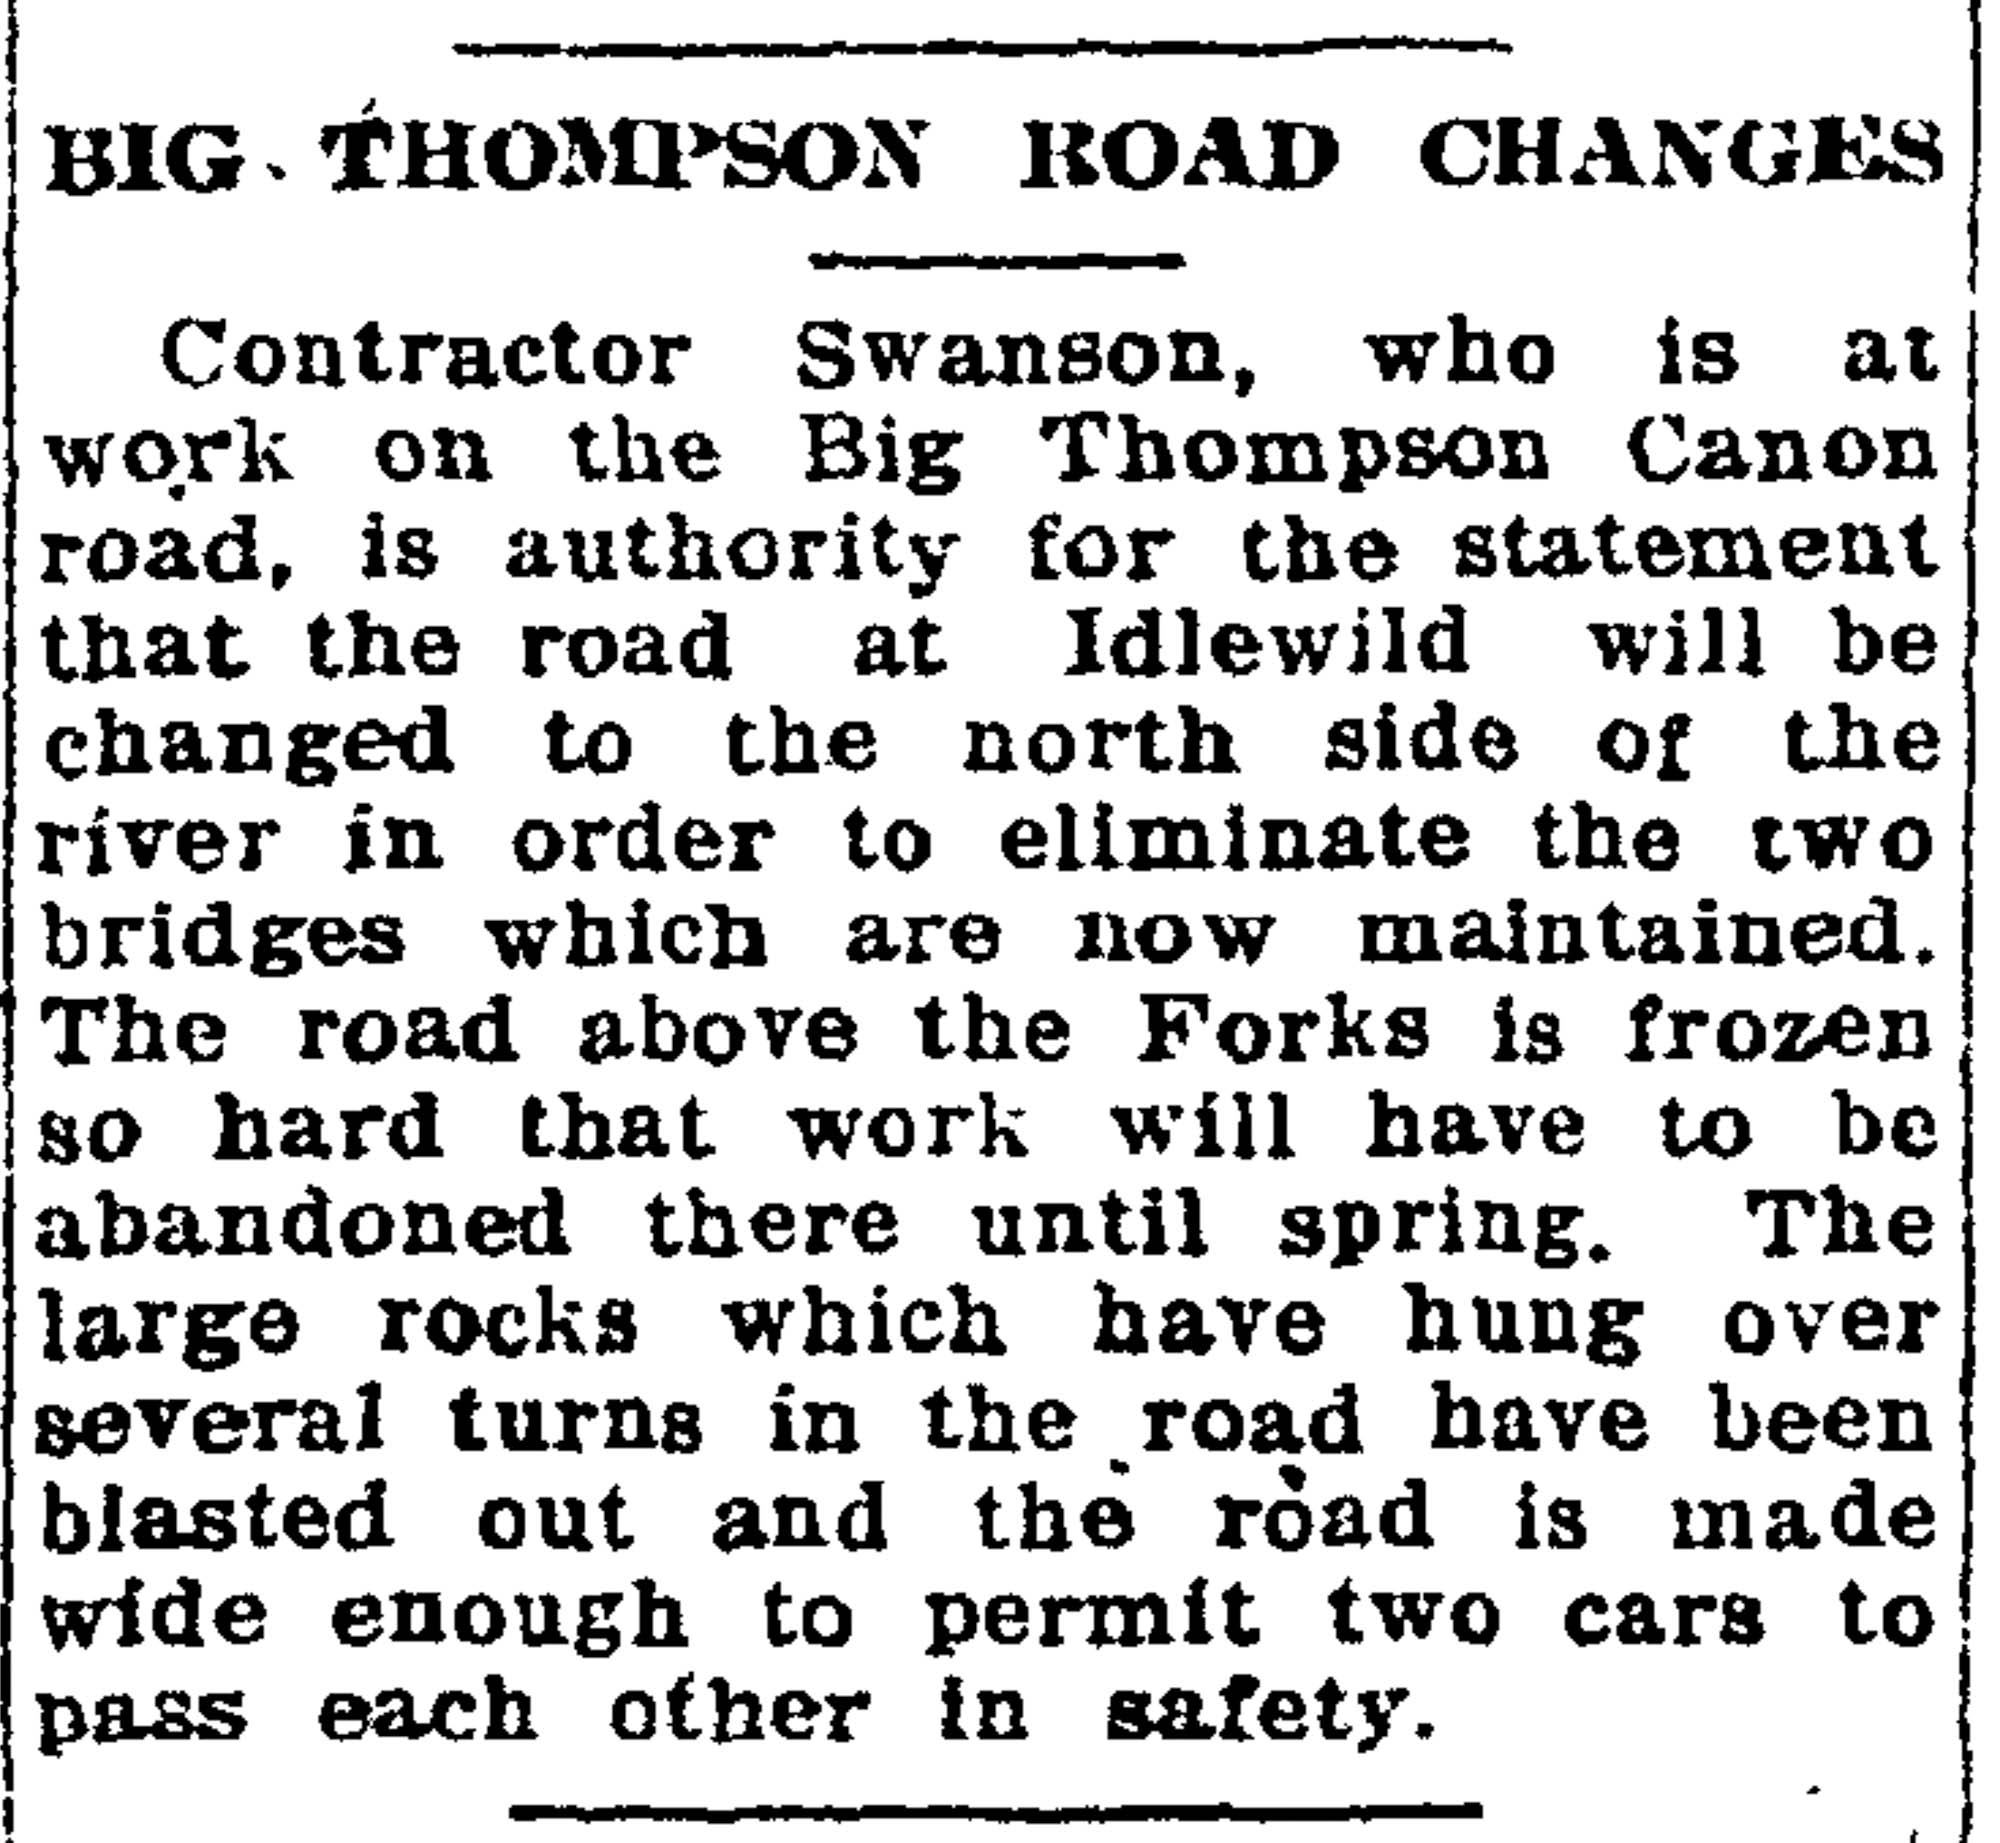 Idlewild Lodge - idlewildlodge.github.io - 1920-01-05 - Fort Collins Courier - Idlewild road move to other side of river